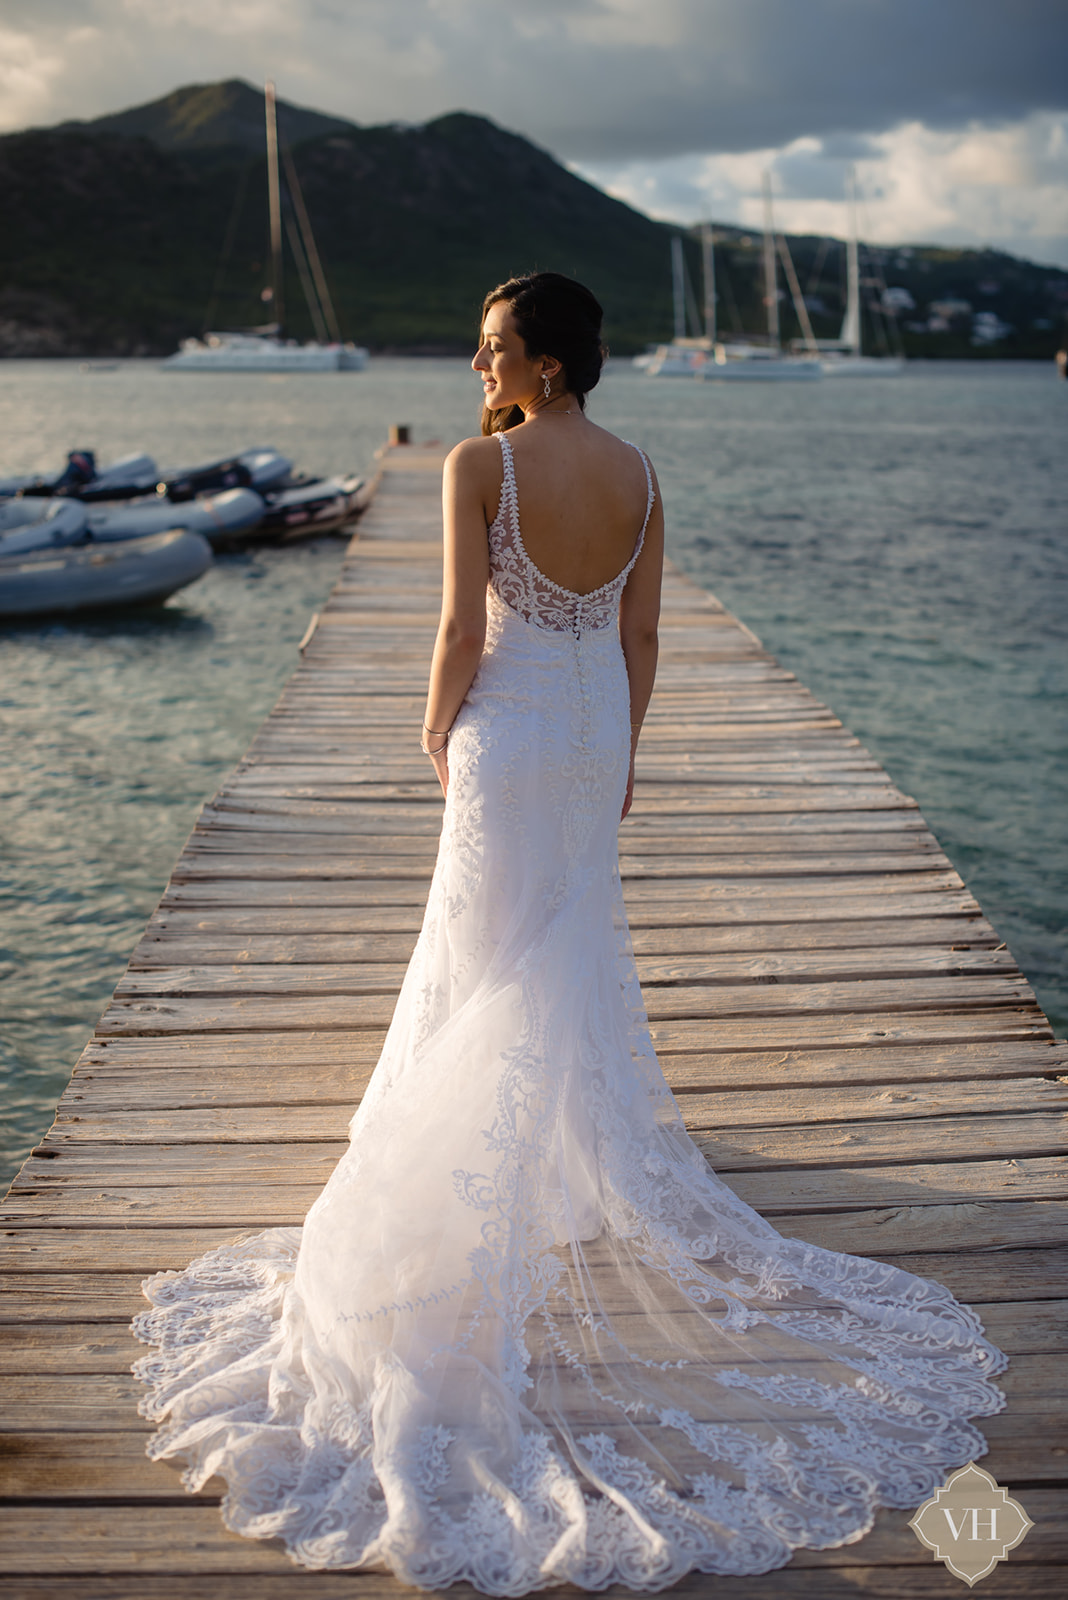 Bride wearing white wedding dress on a wooden dock after her beach wedding on the  island of antigua and barbuda